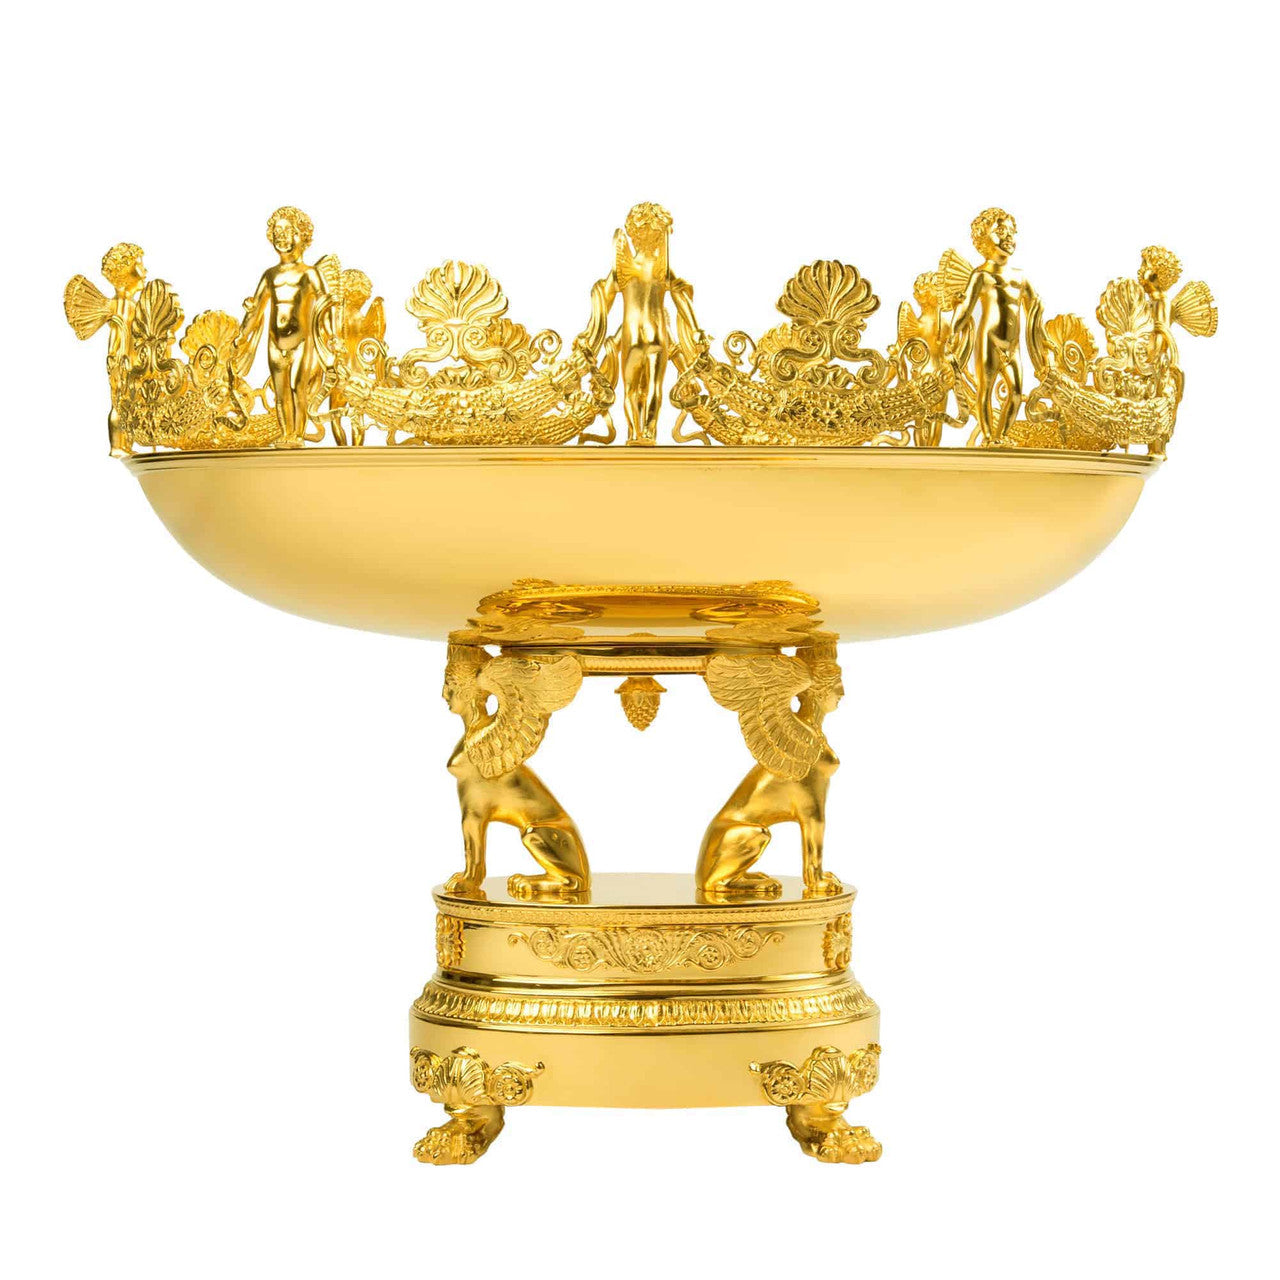 Oval Bowl with Sphinxes and Cherubs